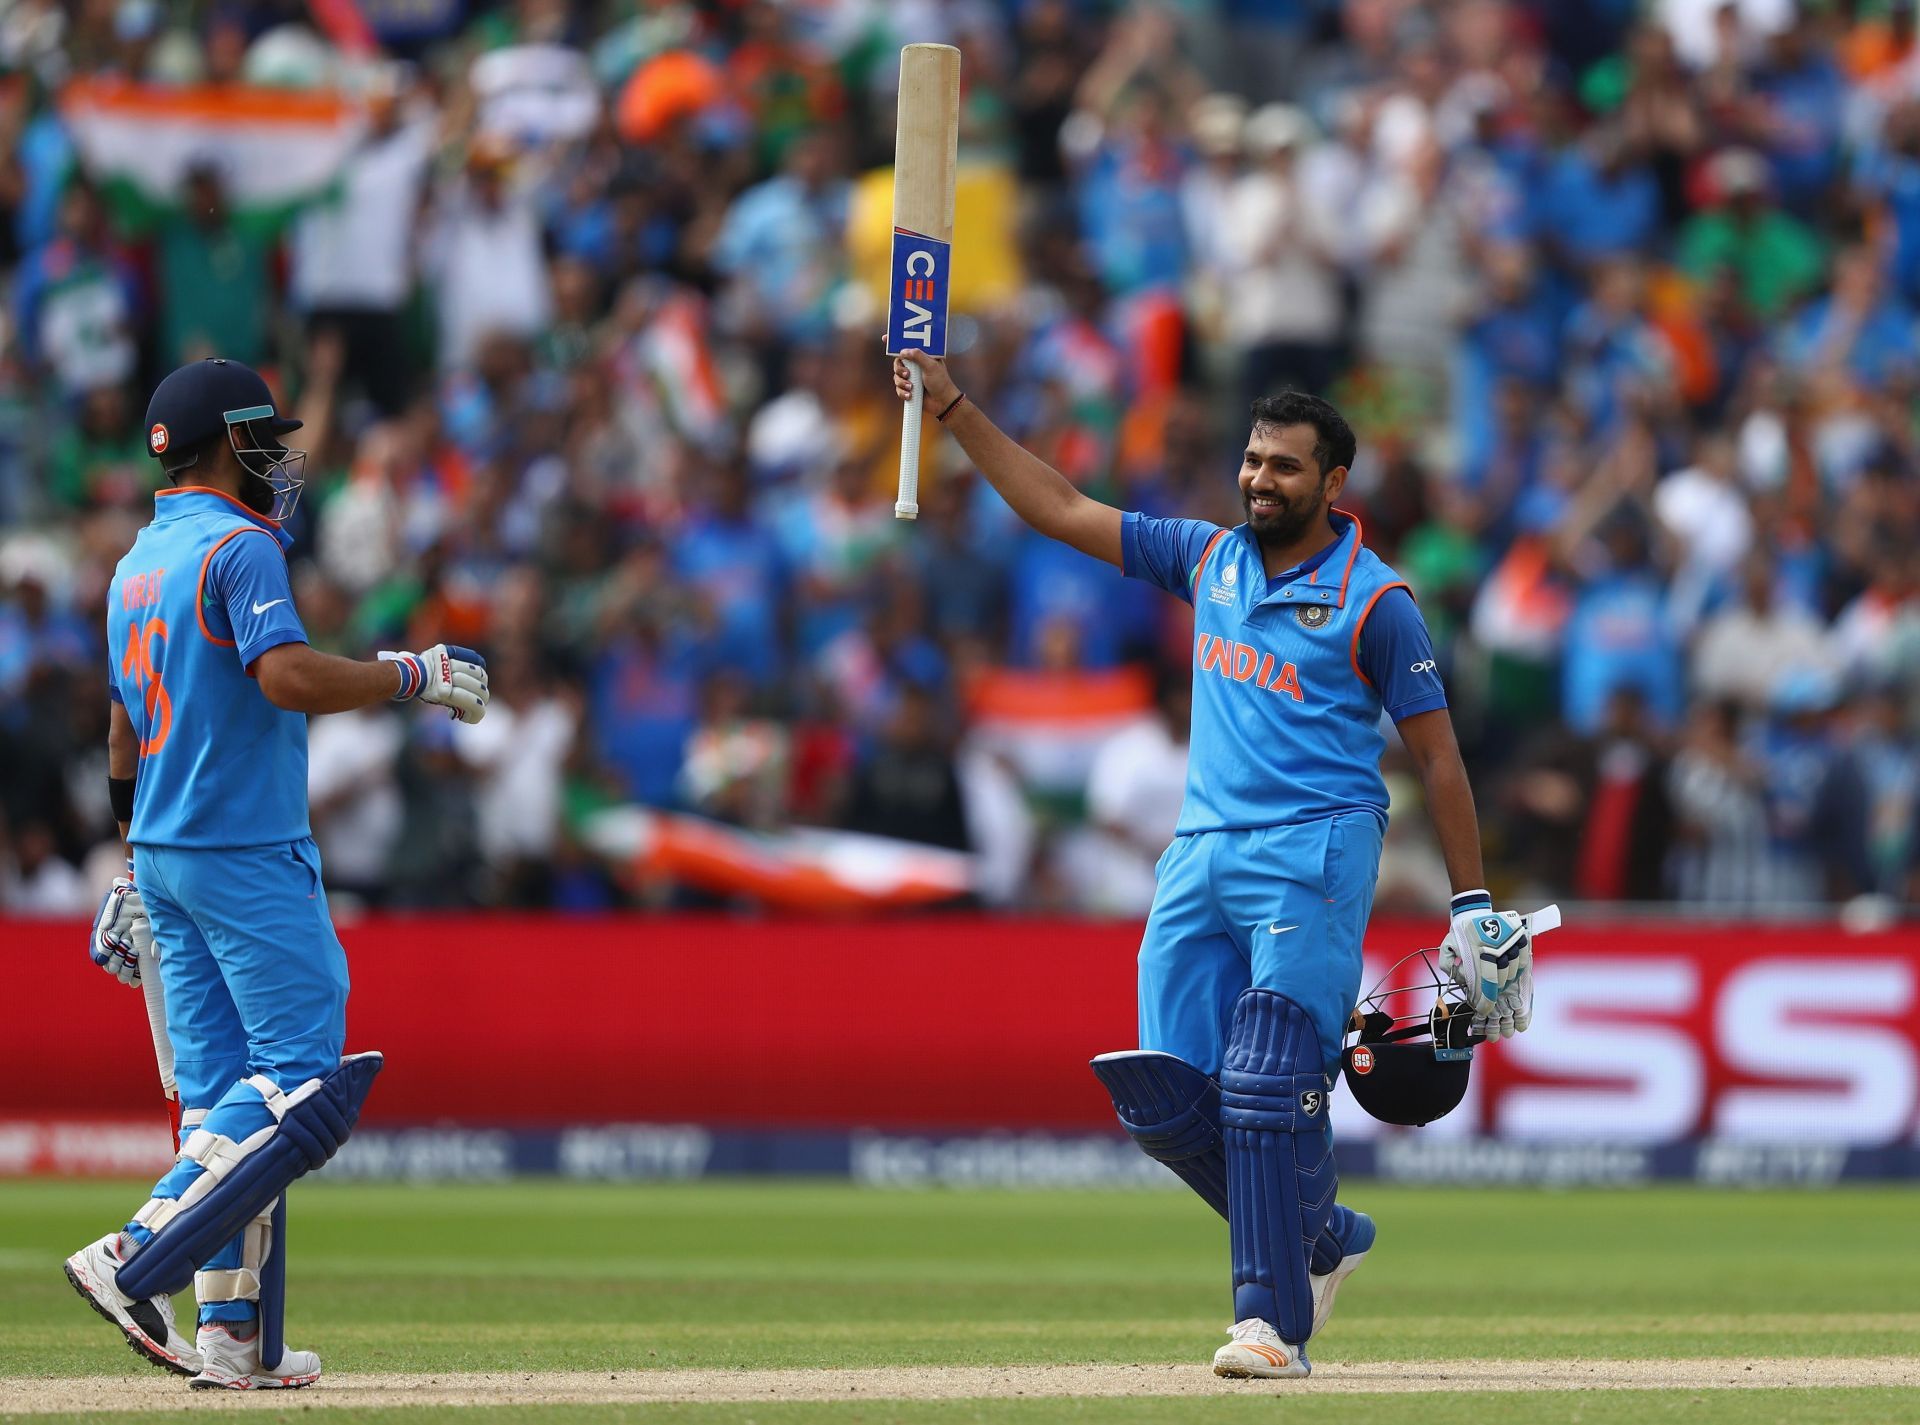 Hogg wants Virat Kohli (left) and Rohit Sharma (right) to open the innings for India at the T20 World Cup.